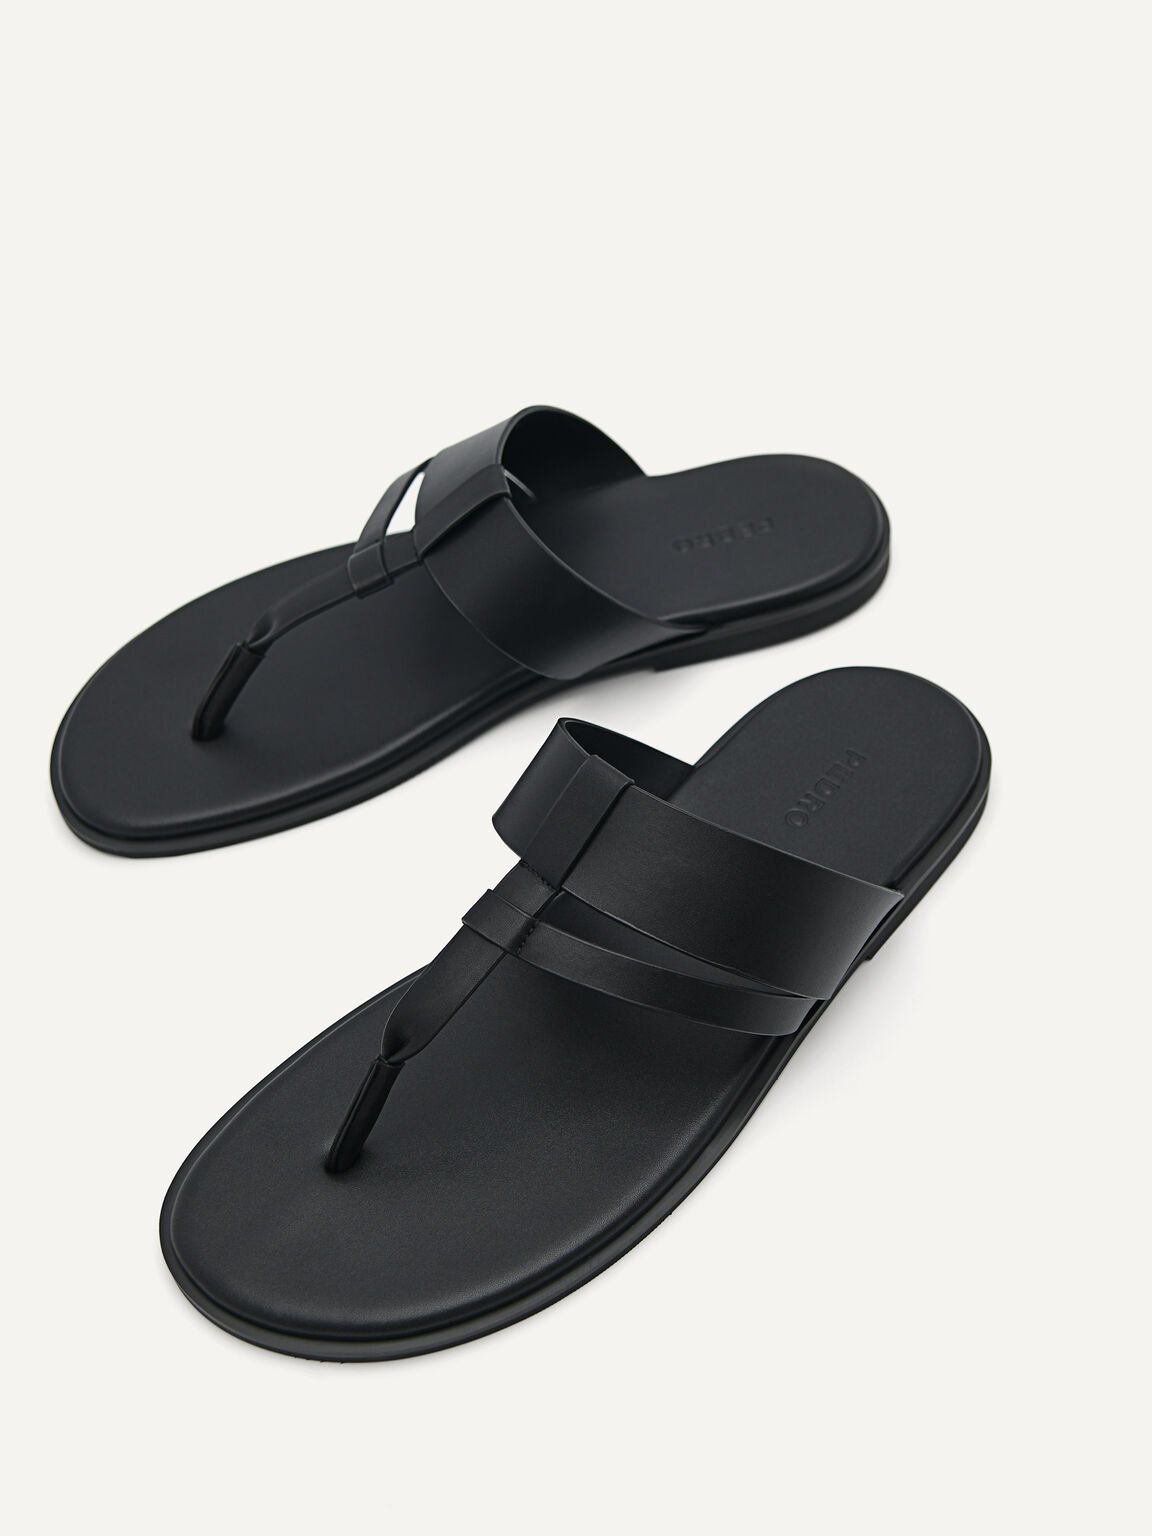 Synthetic Leather Grid Thong Sandals, Black